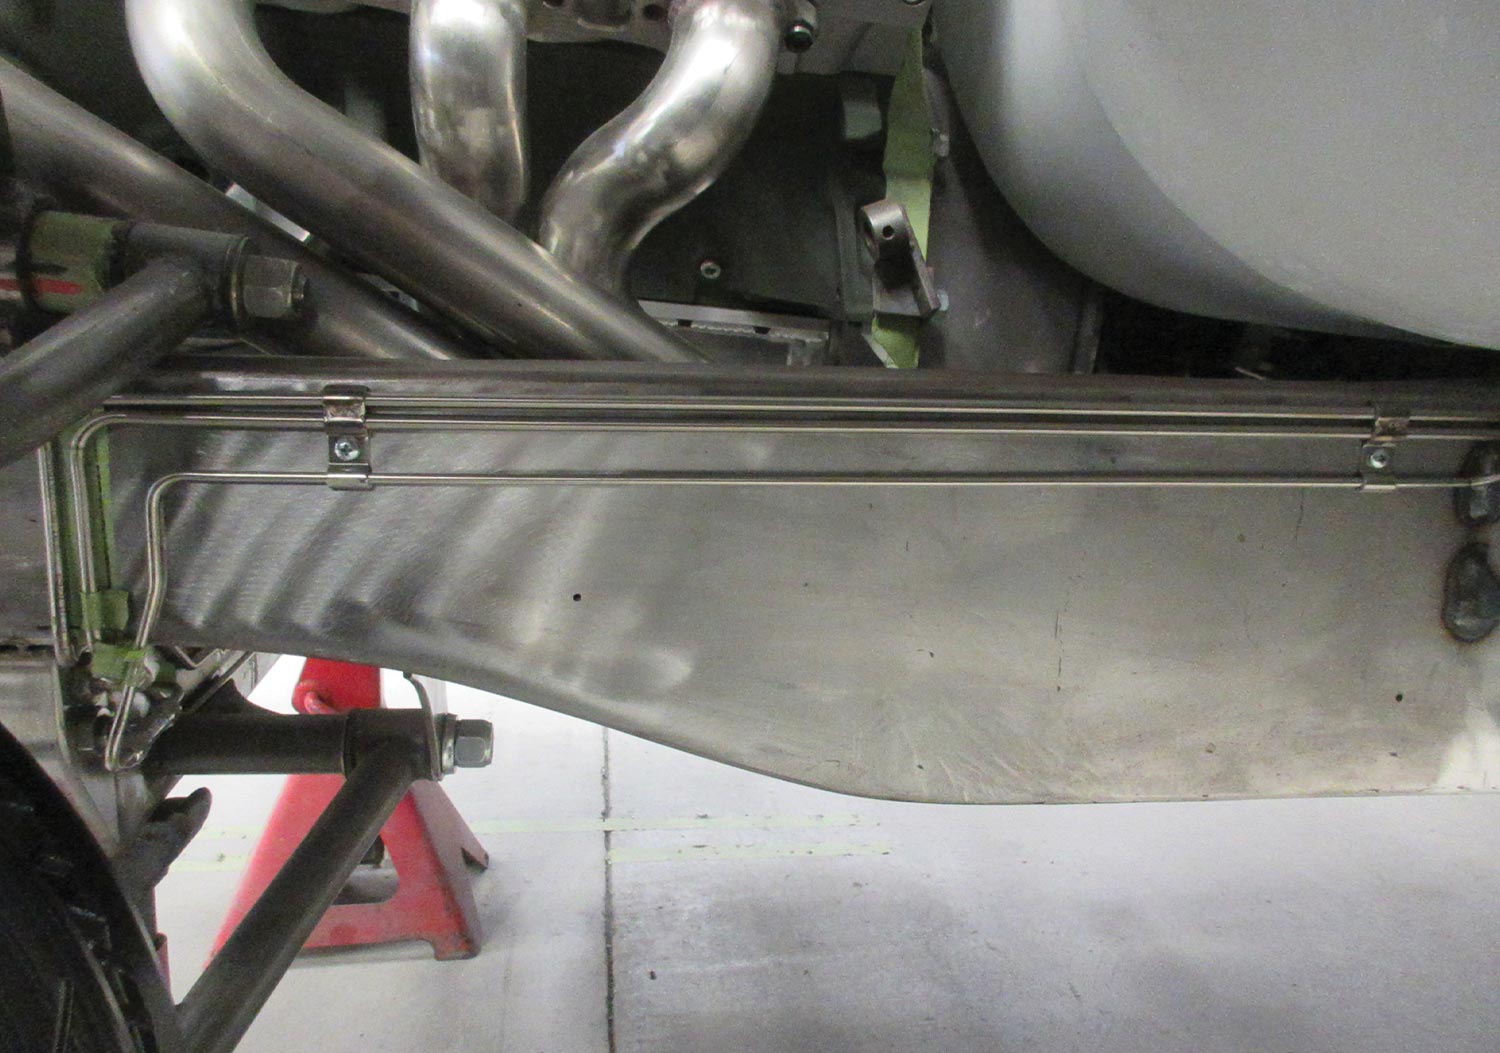 close view of the brake lines beneath the car